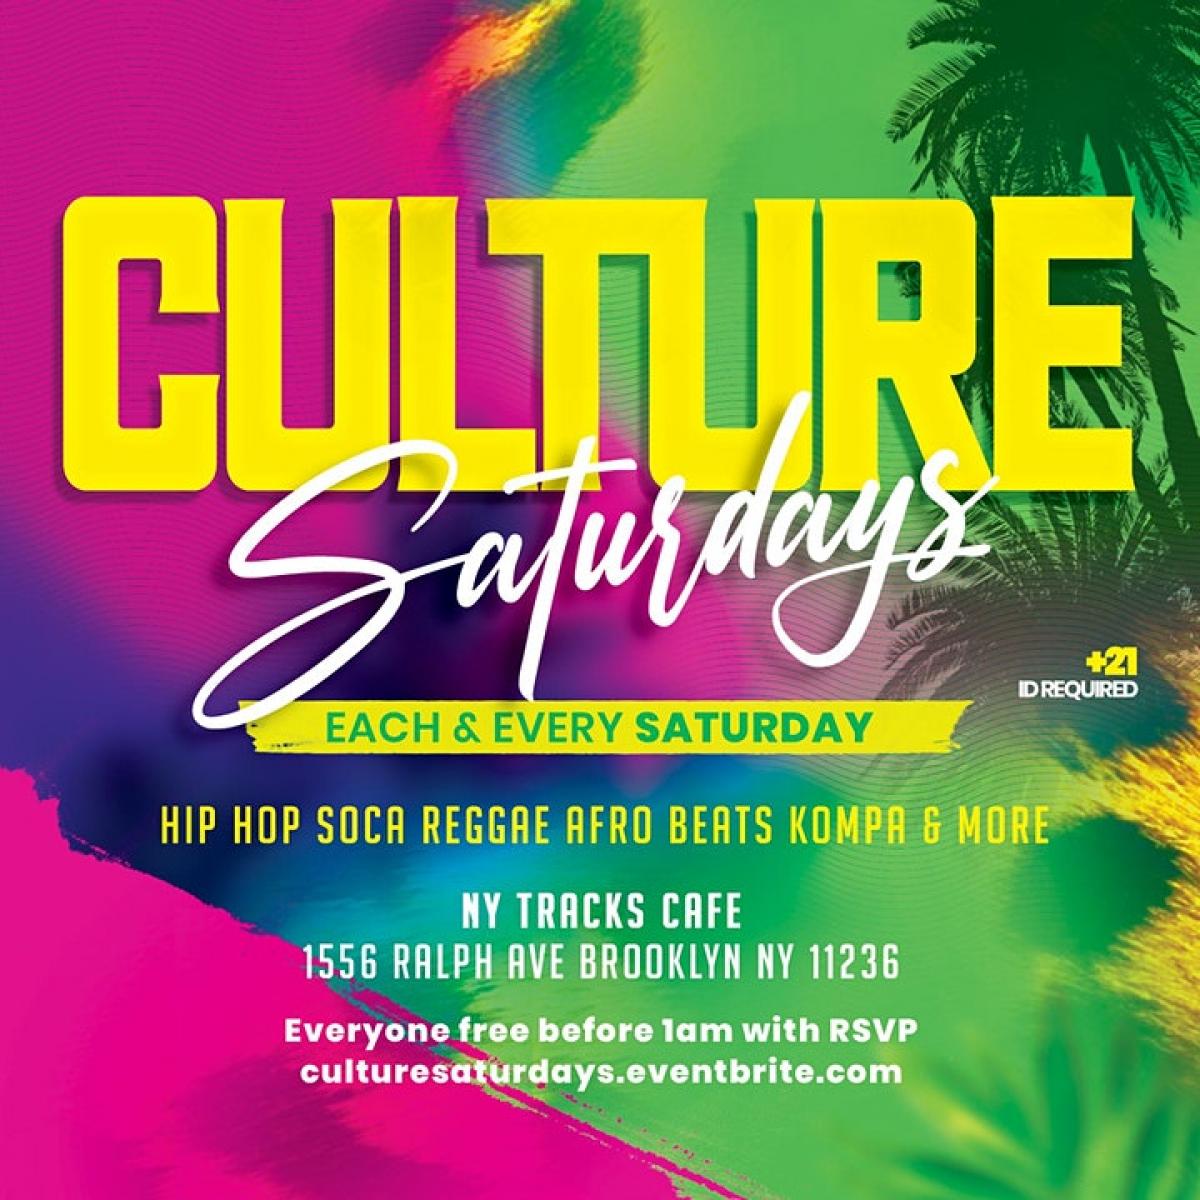 Culture Saturdays flyer or graphic.